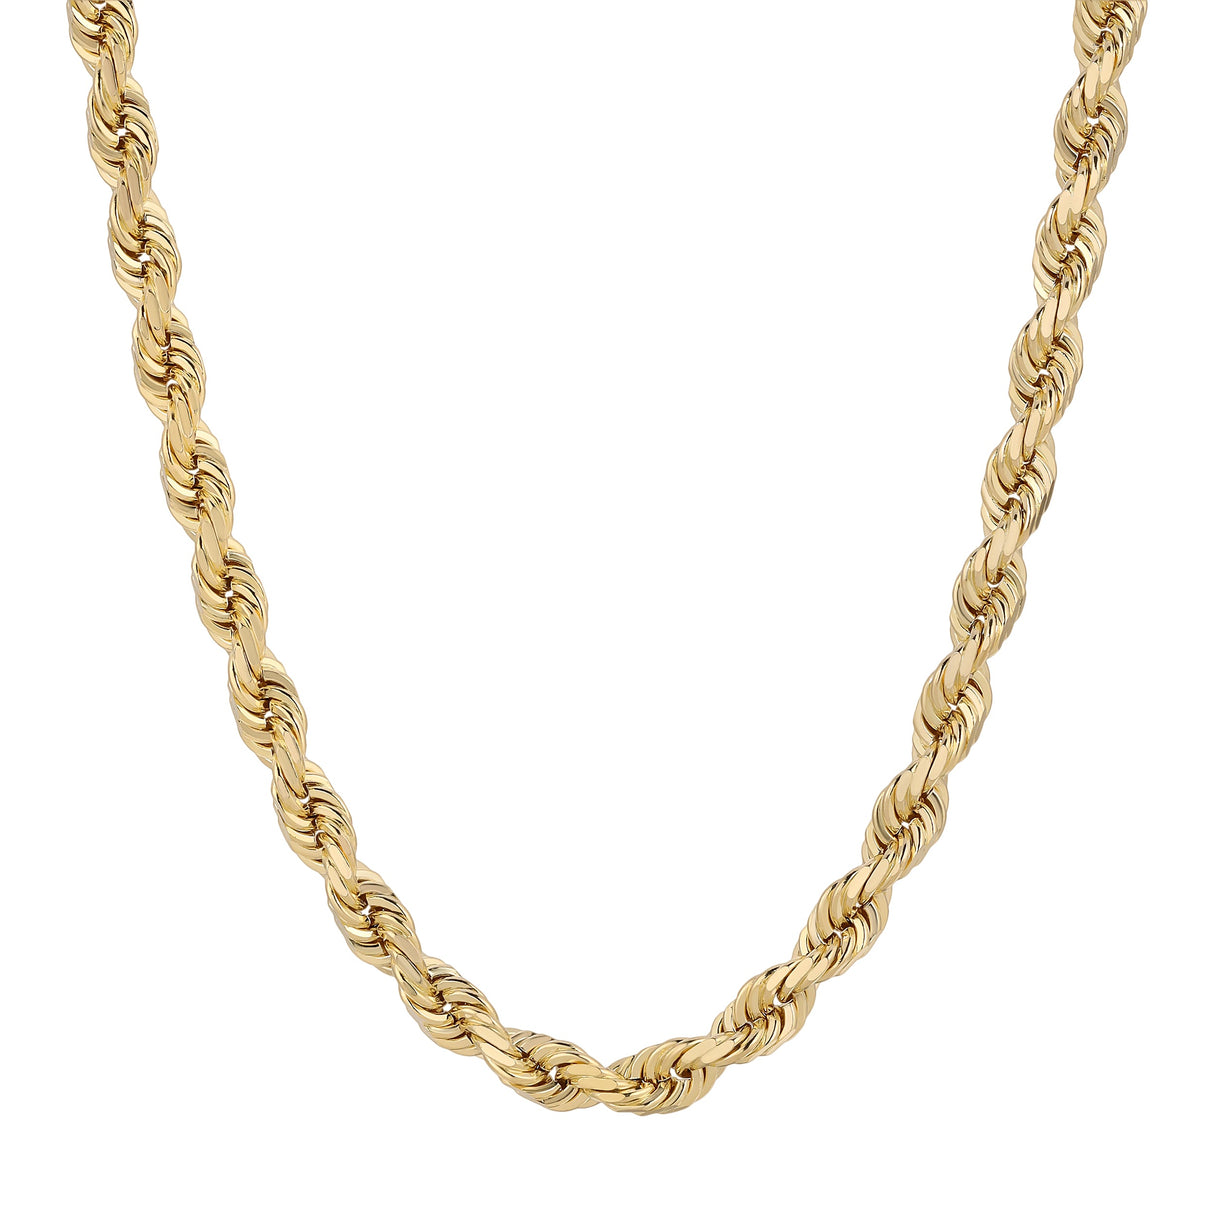 10K Yellow Gold Men's Chain (1.5mm-6mm) | Italian-crafted hollow rope chains in various widths at Italian Fashions